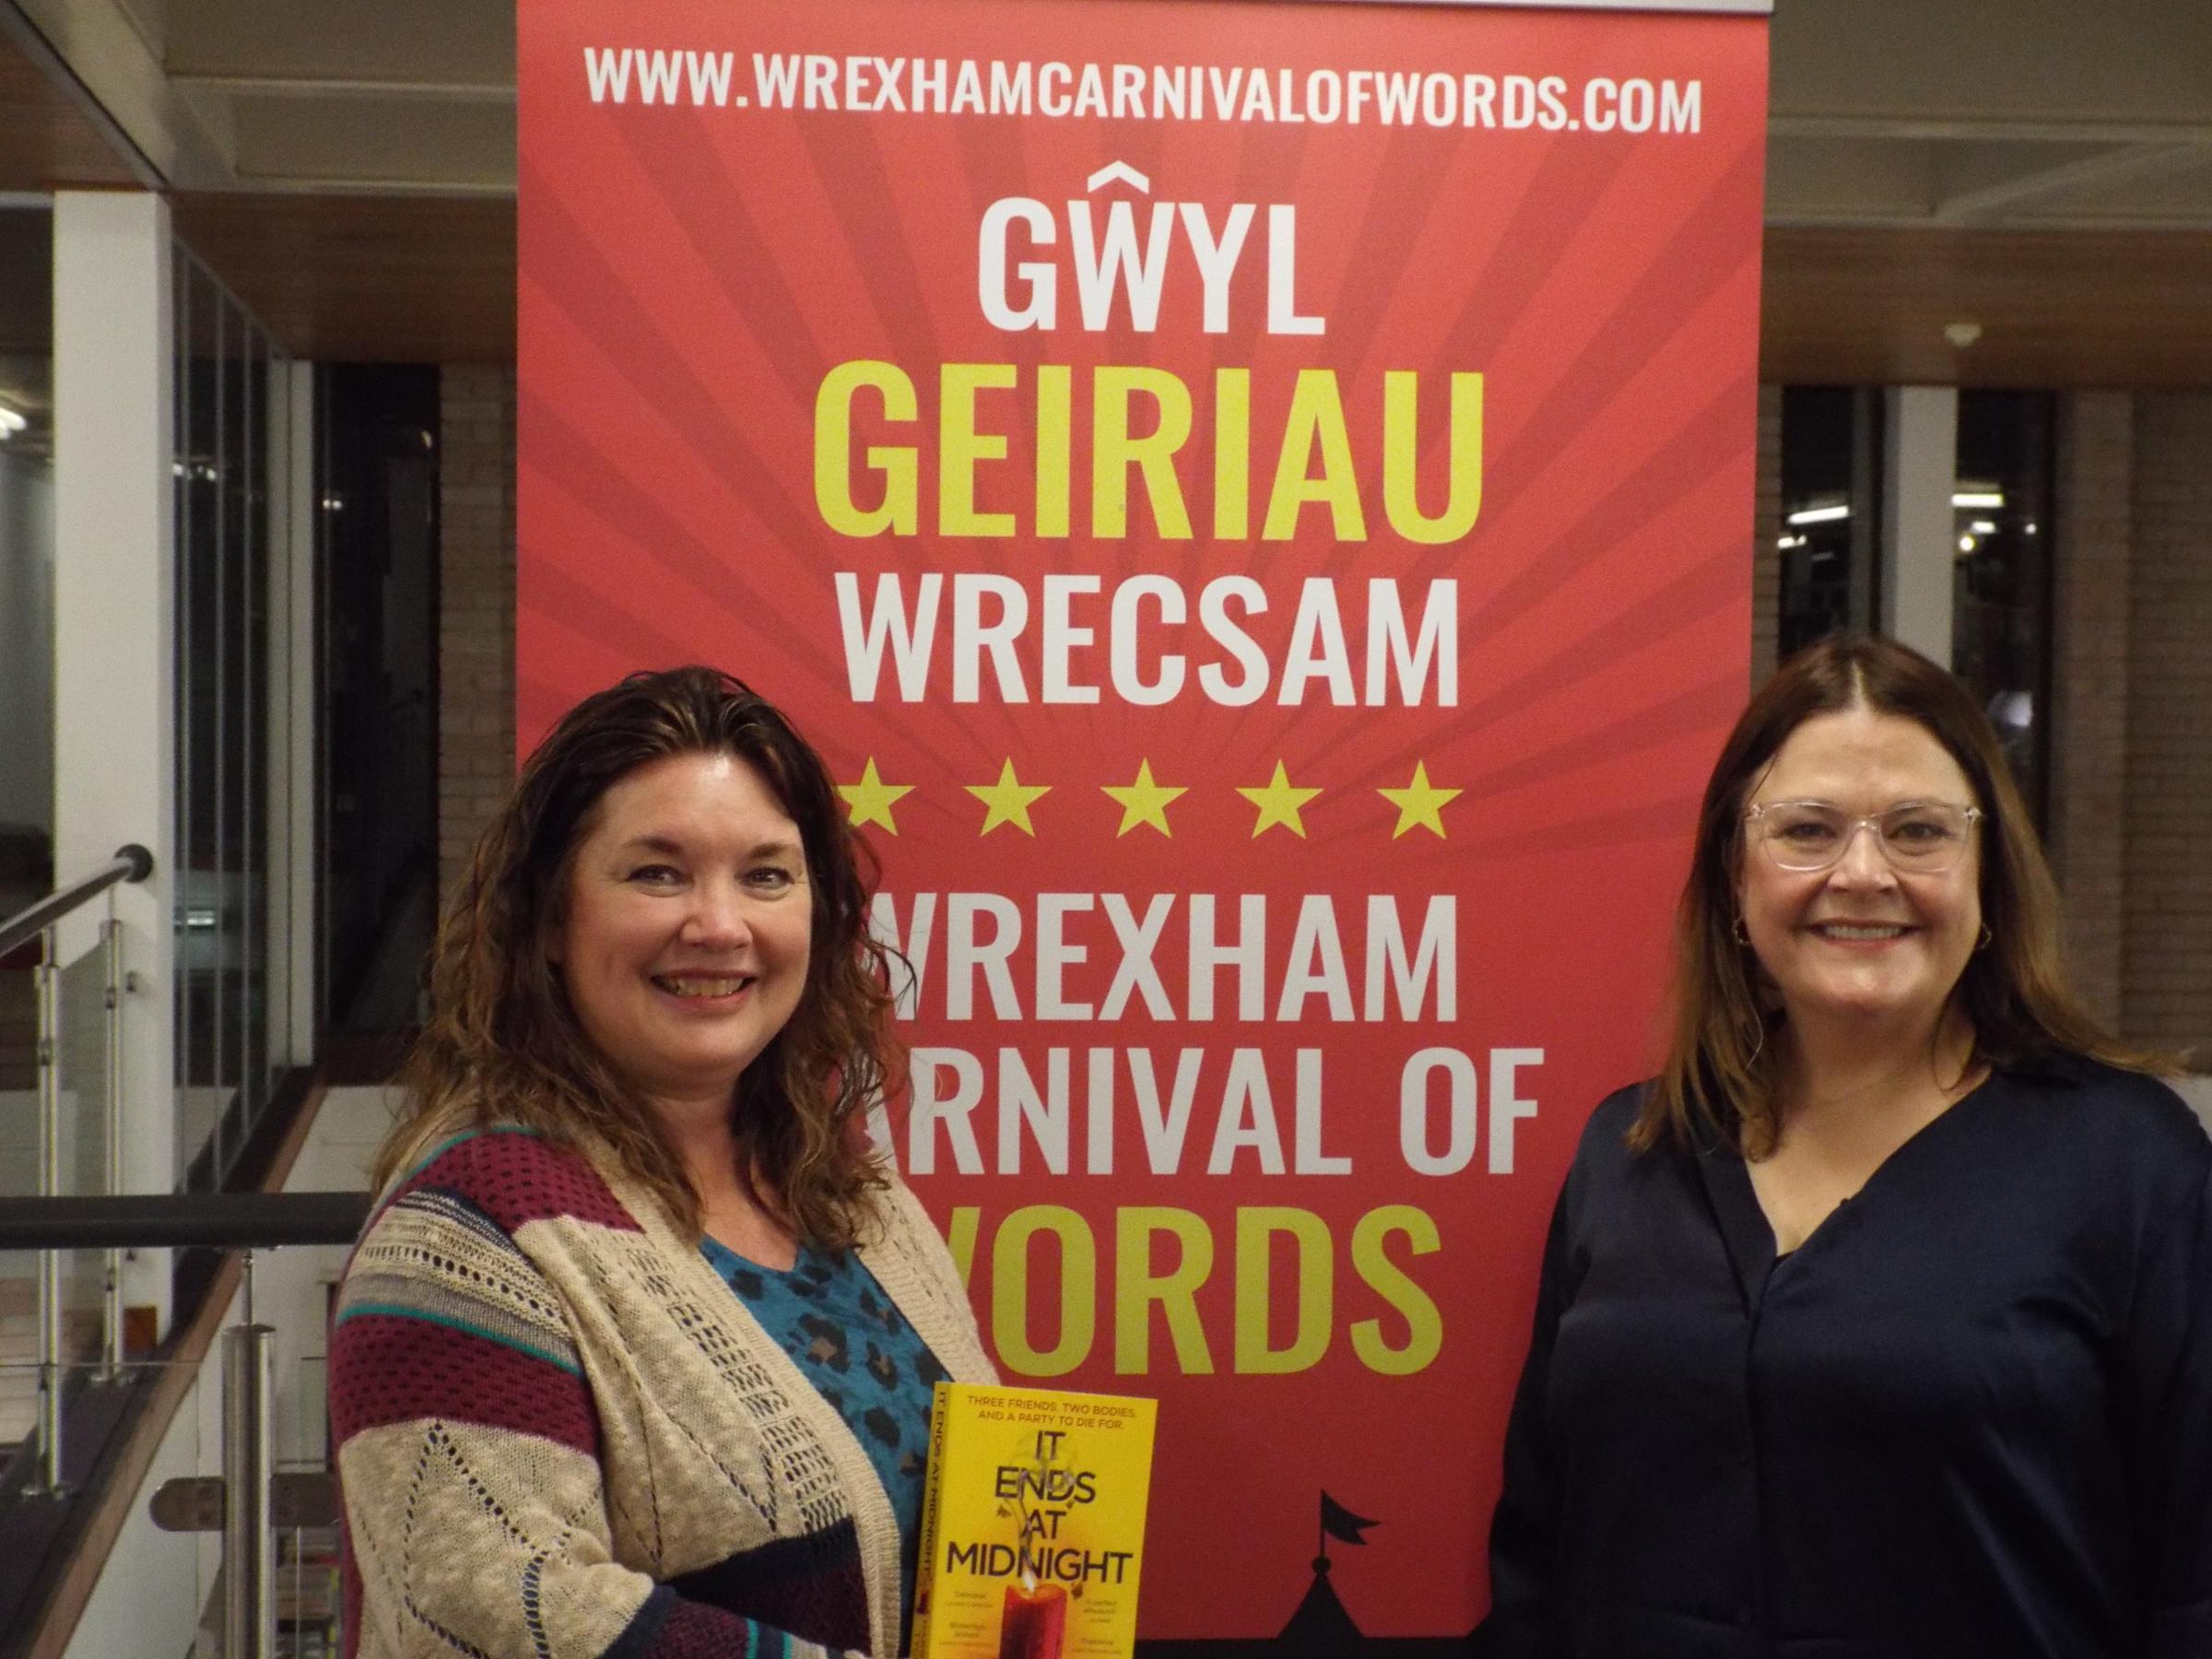 Harriet Tyce (right) and host Sue Miller at the launch of the Wrexham Carnival of Words.